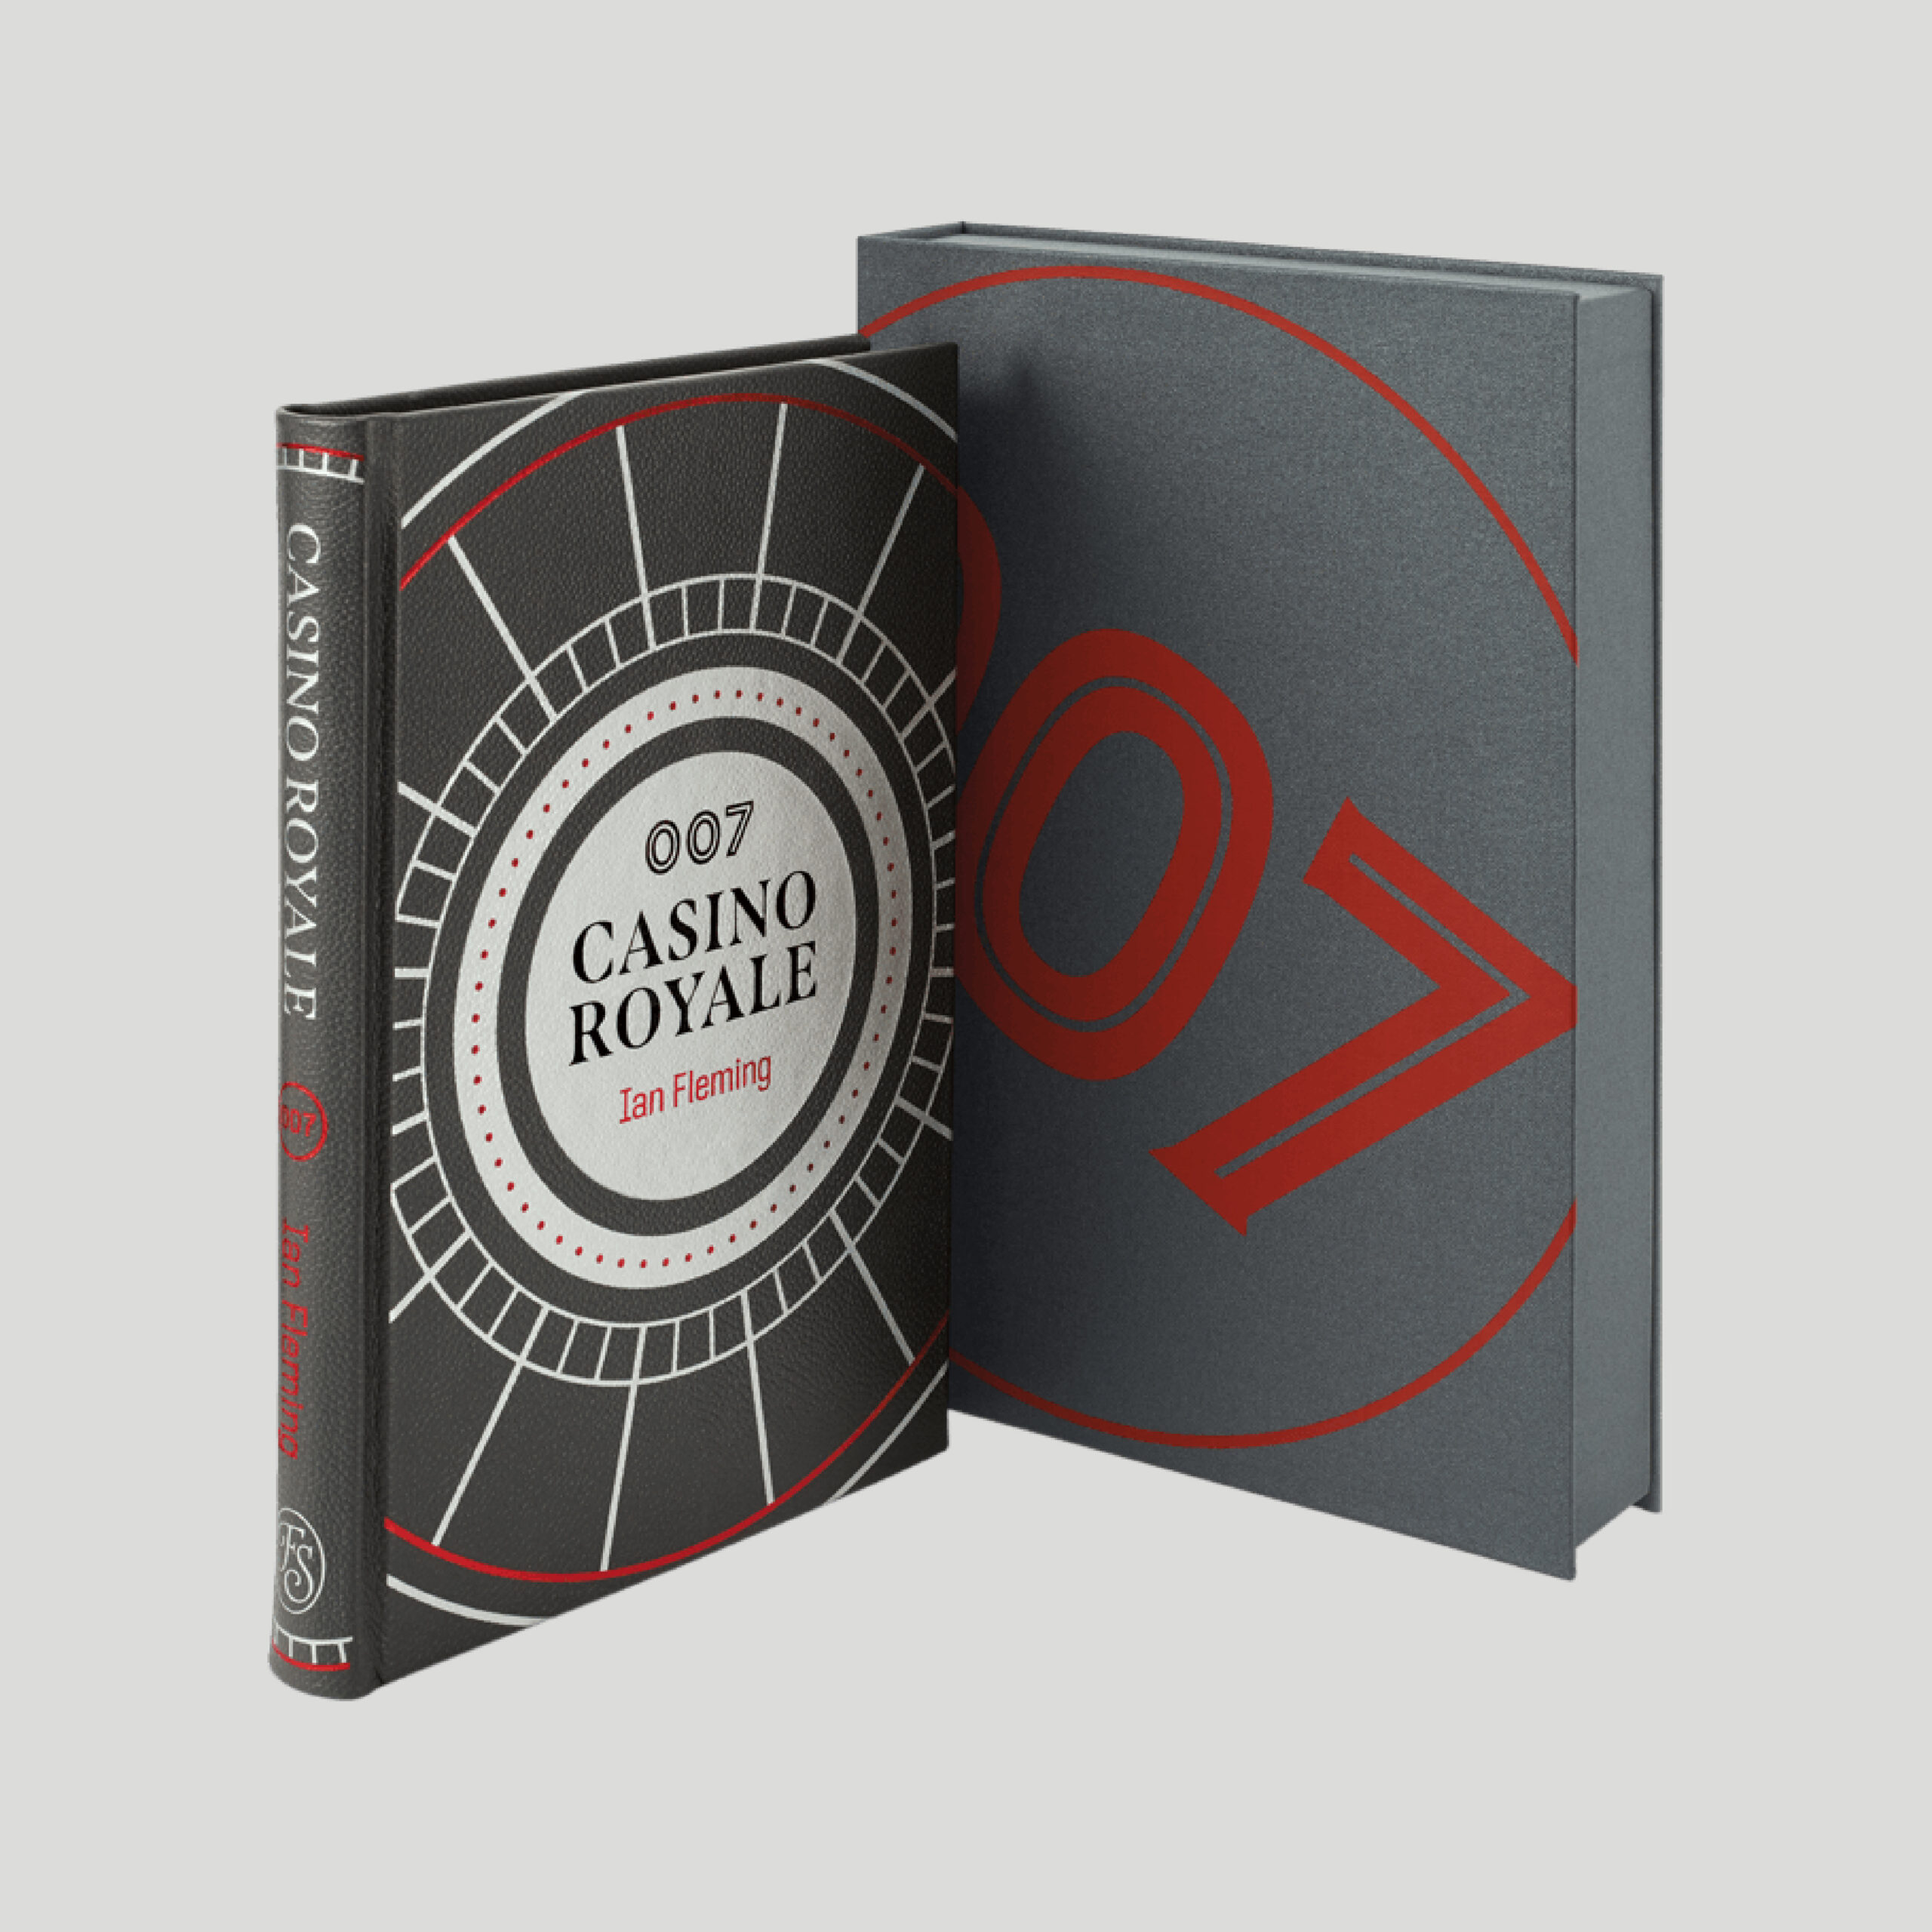 Casino Royale cover and slipcase illustration and design by Jamie Clarke Type